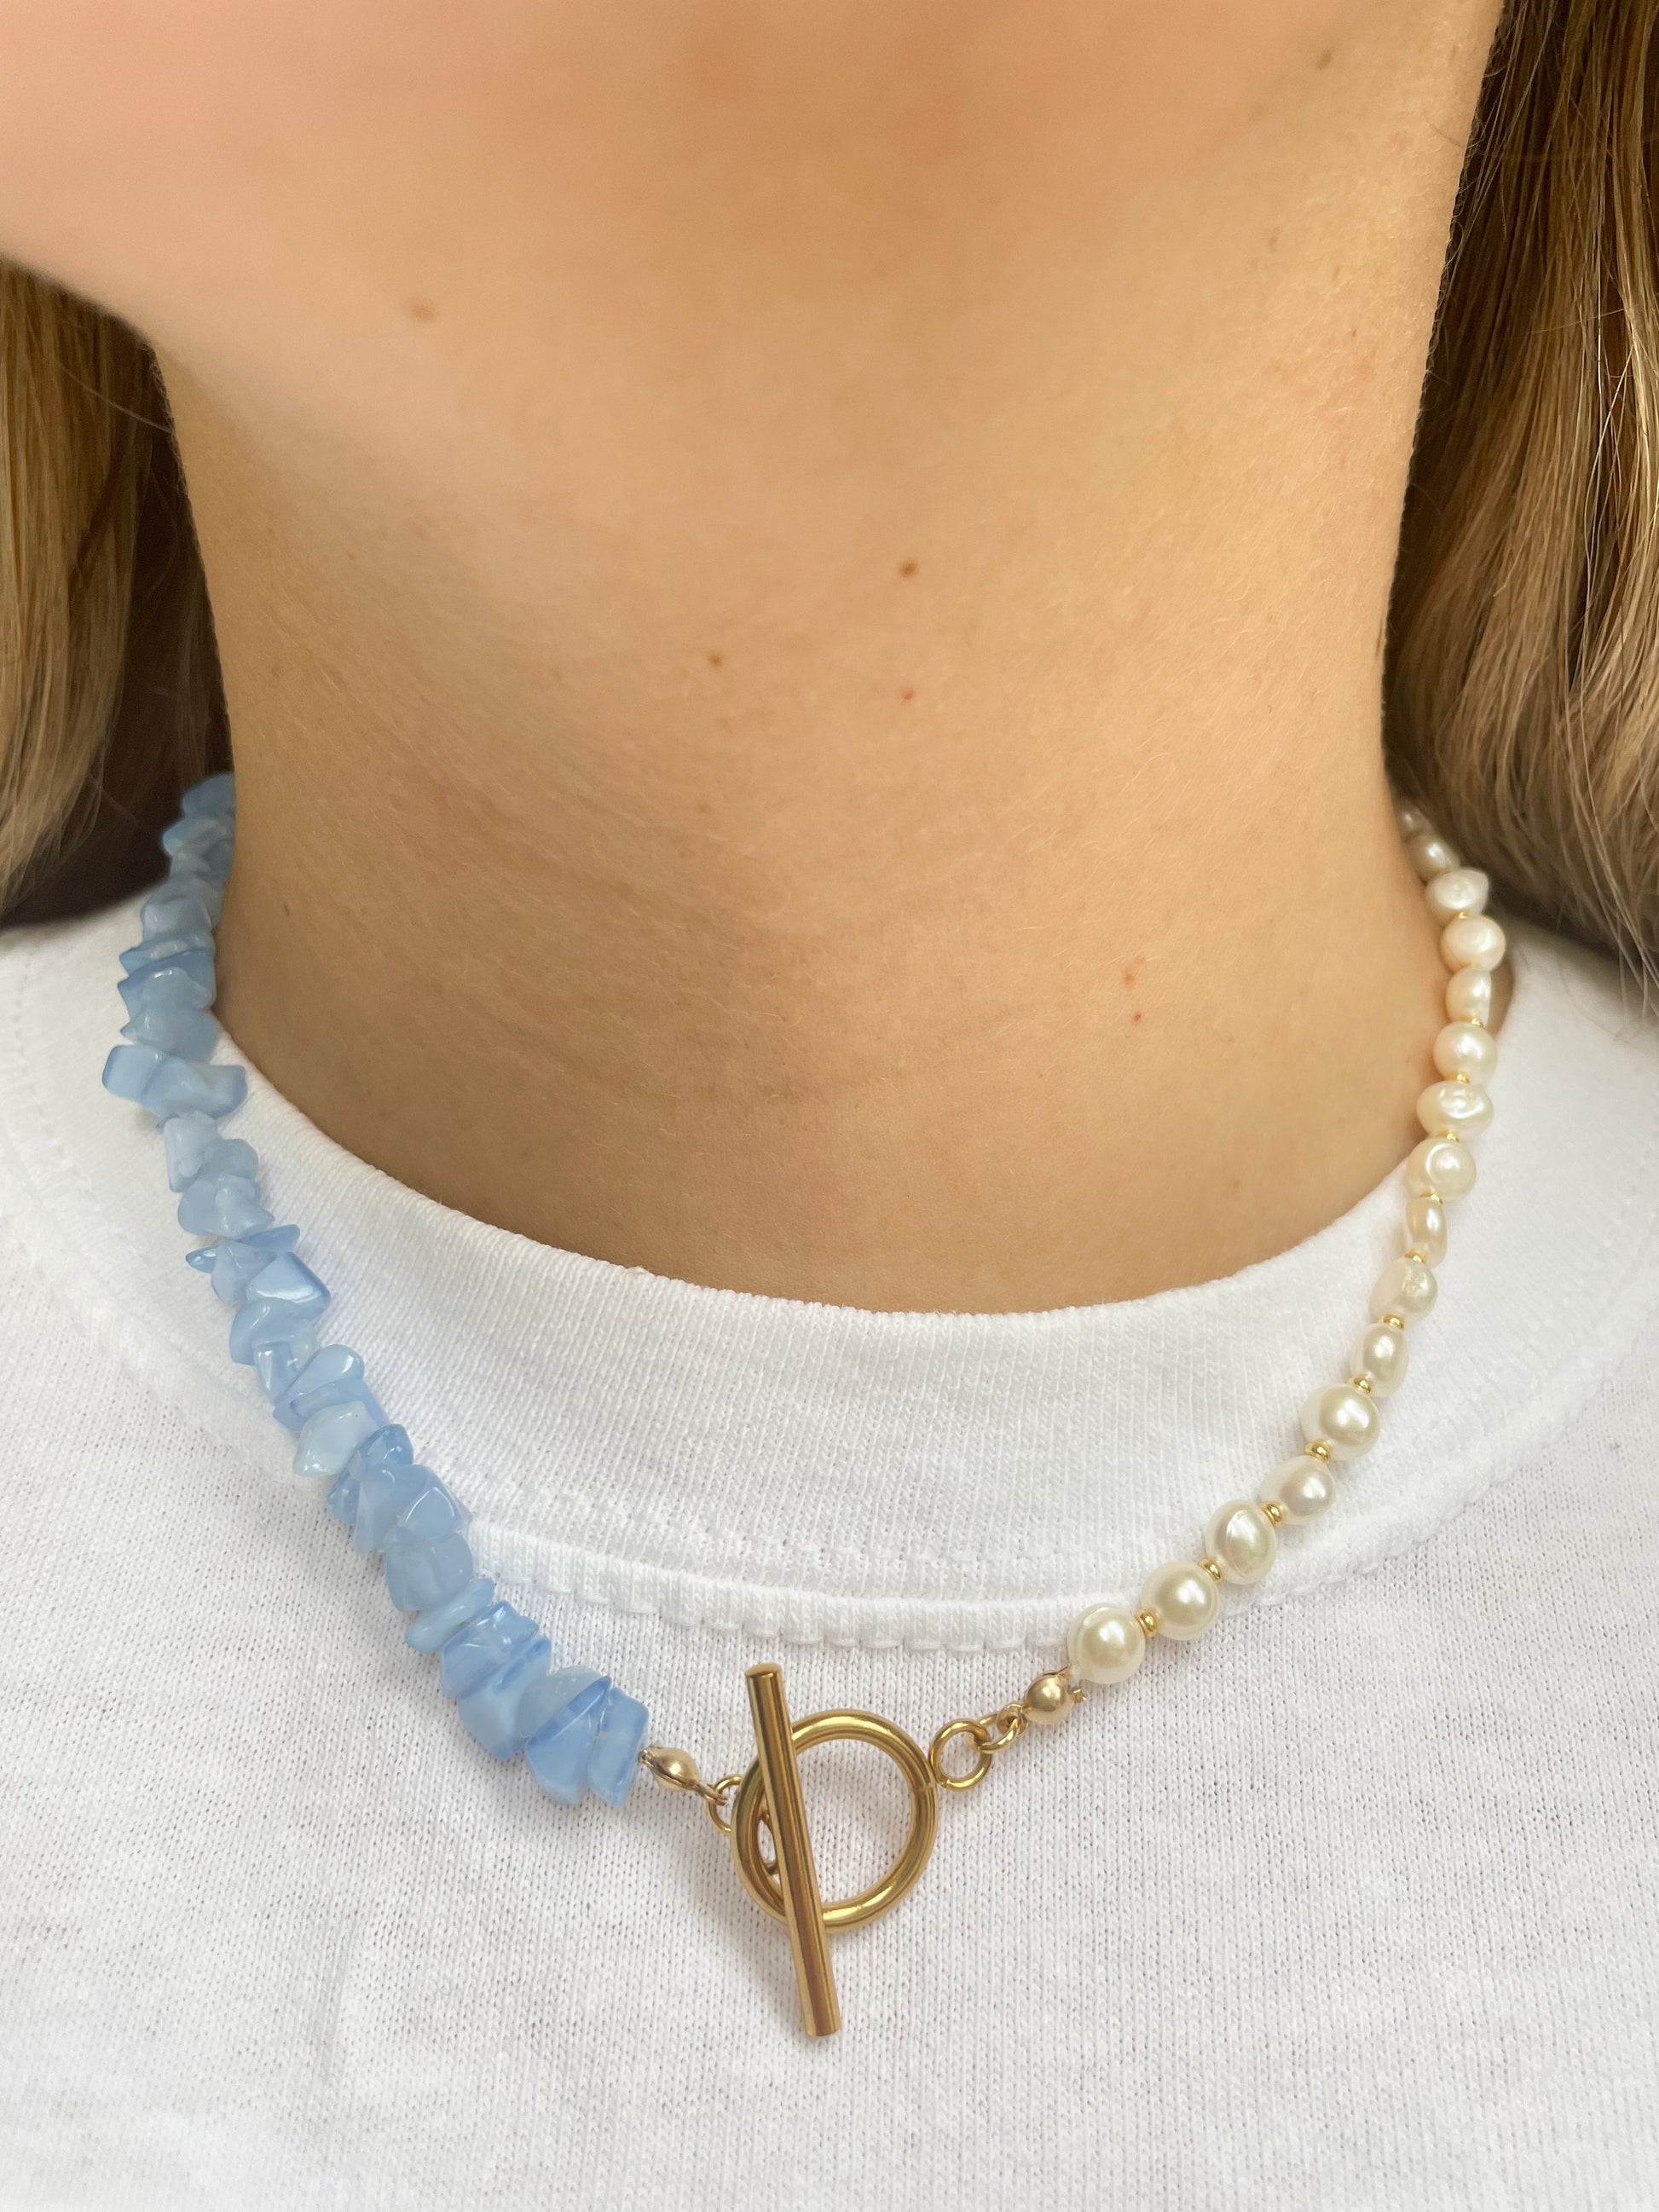 necklace with blue irregular stones and freshwater pearls with a gold clasp at the front